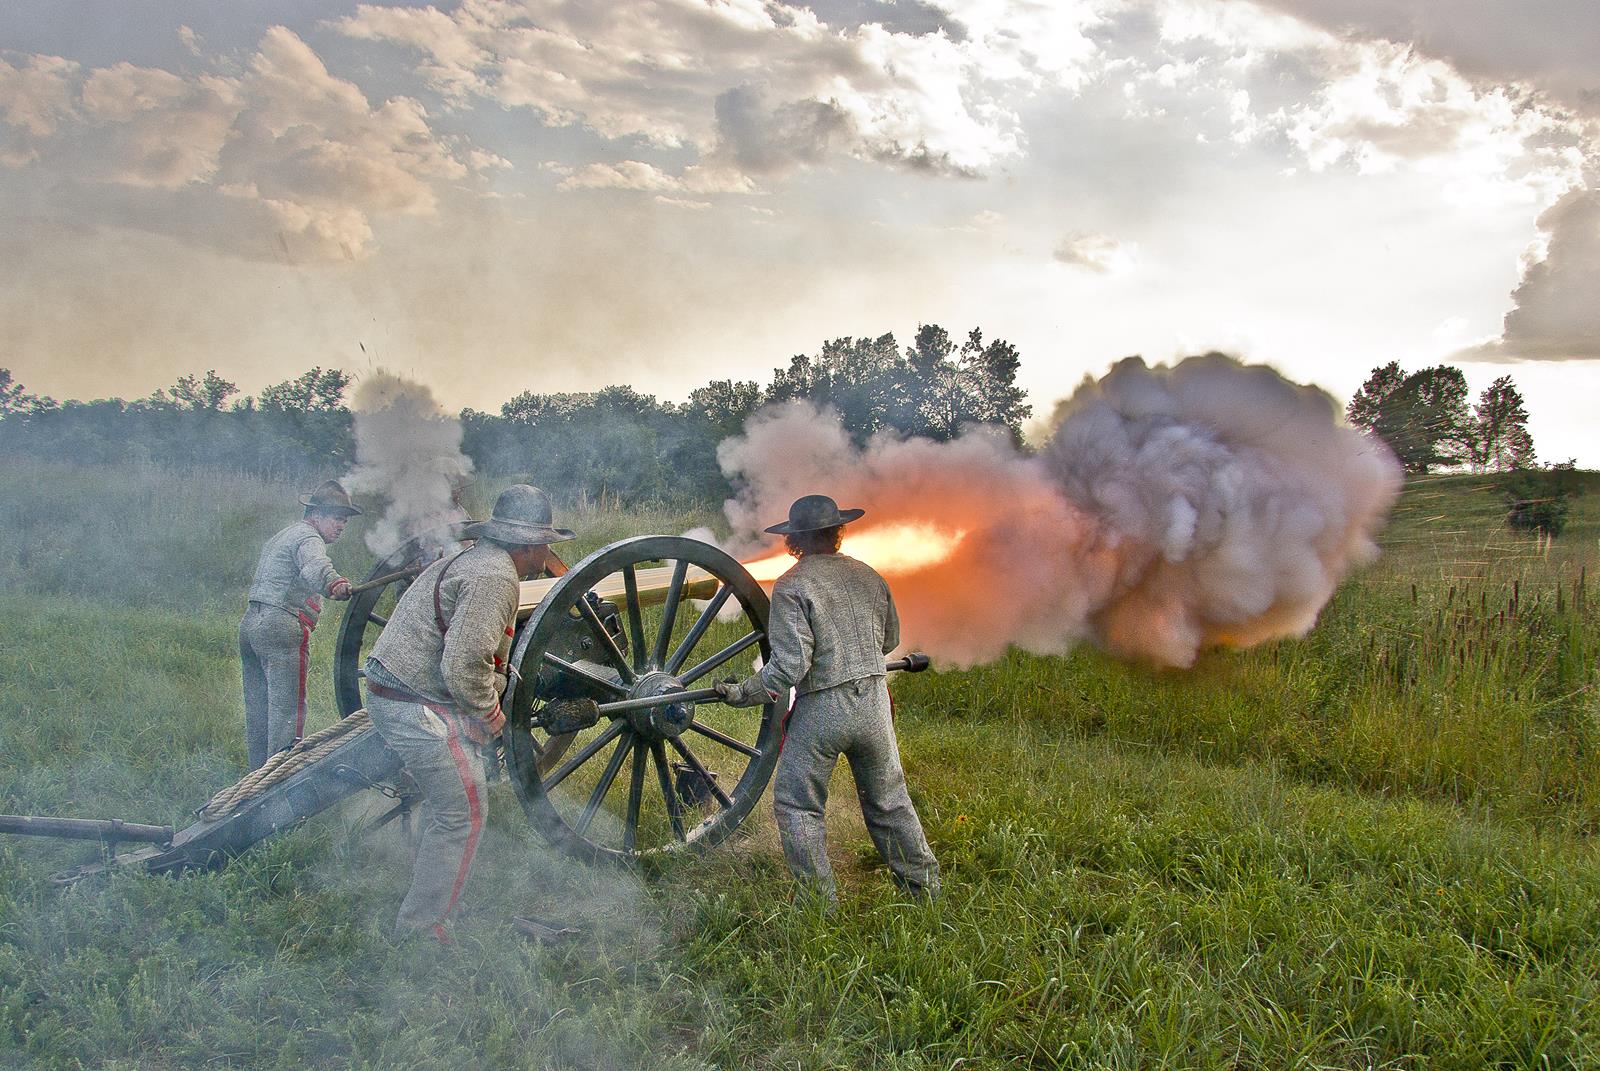 Springfield, Missouri was the site of historic battles, and today visitors can learn about the past through museums and reenactments